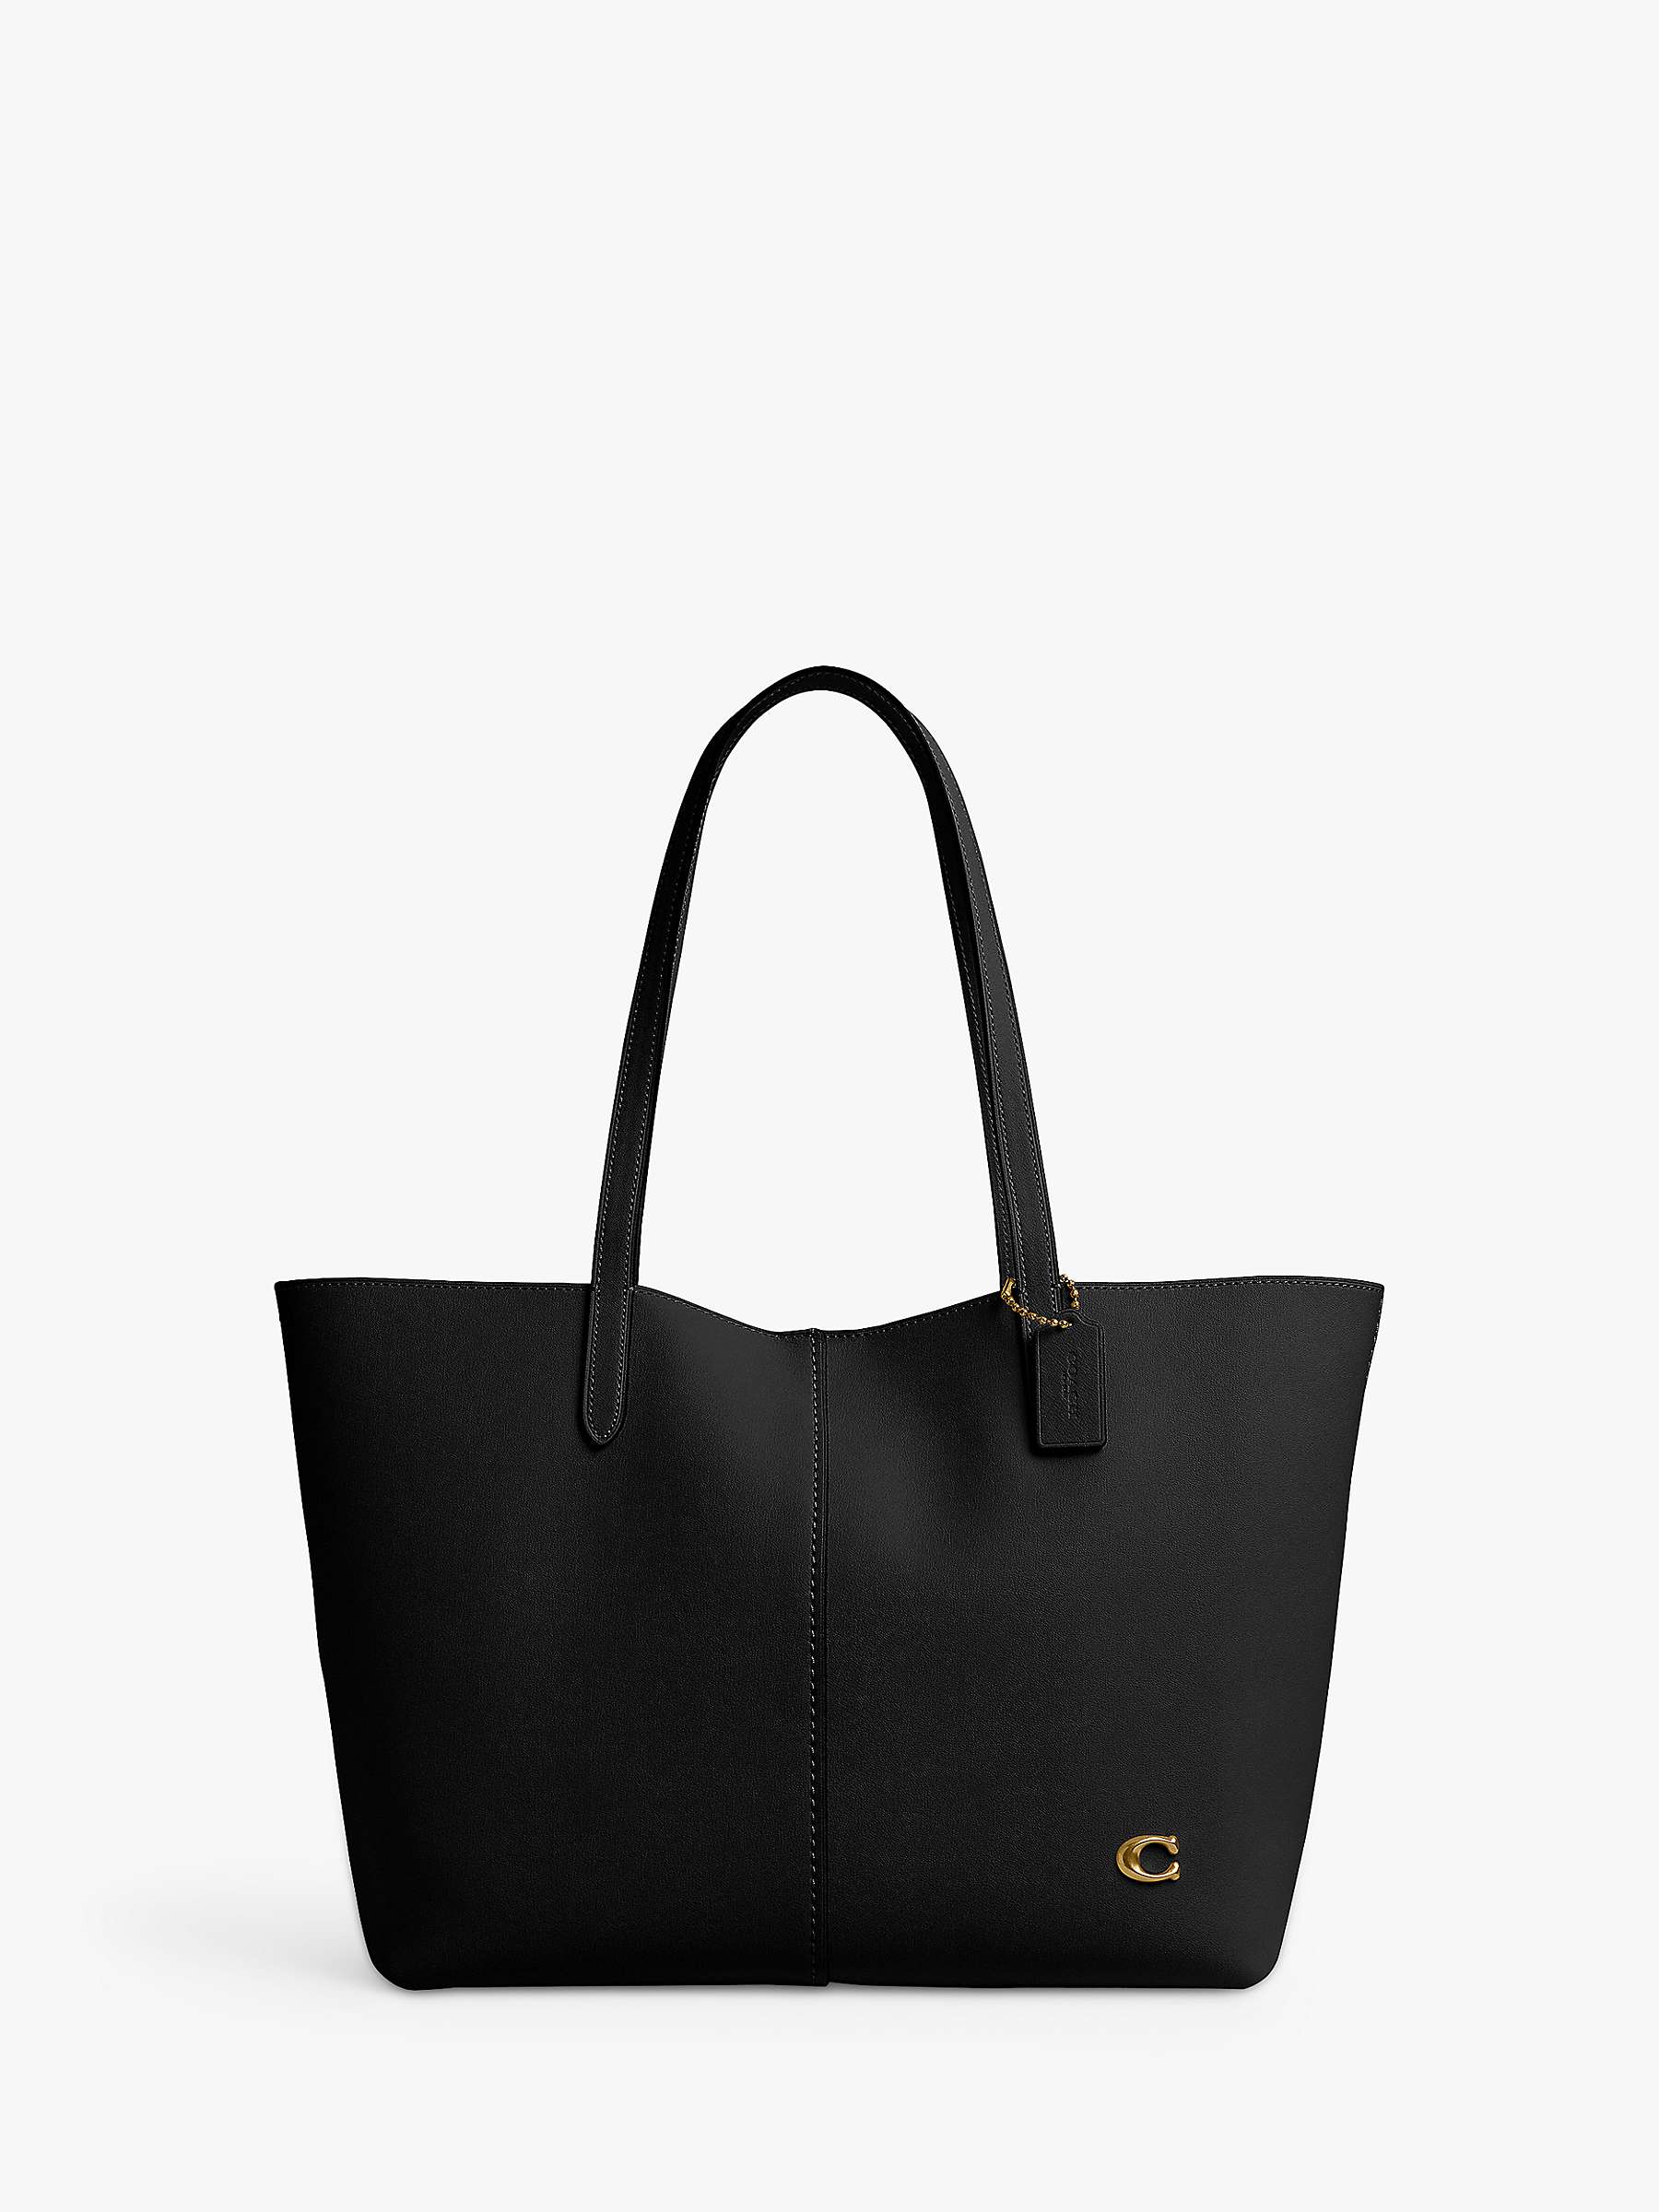 Buy Coach North 32 Leather Tote Bag, Black Online at johnlewis.com